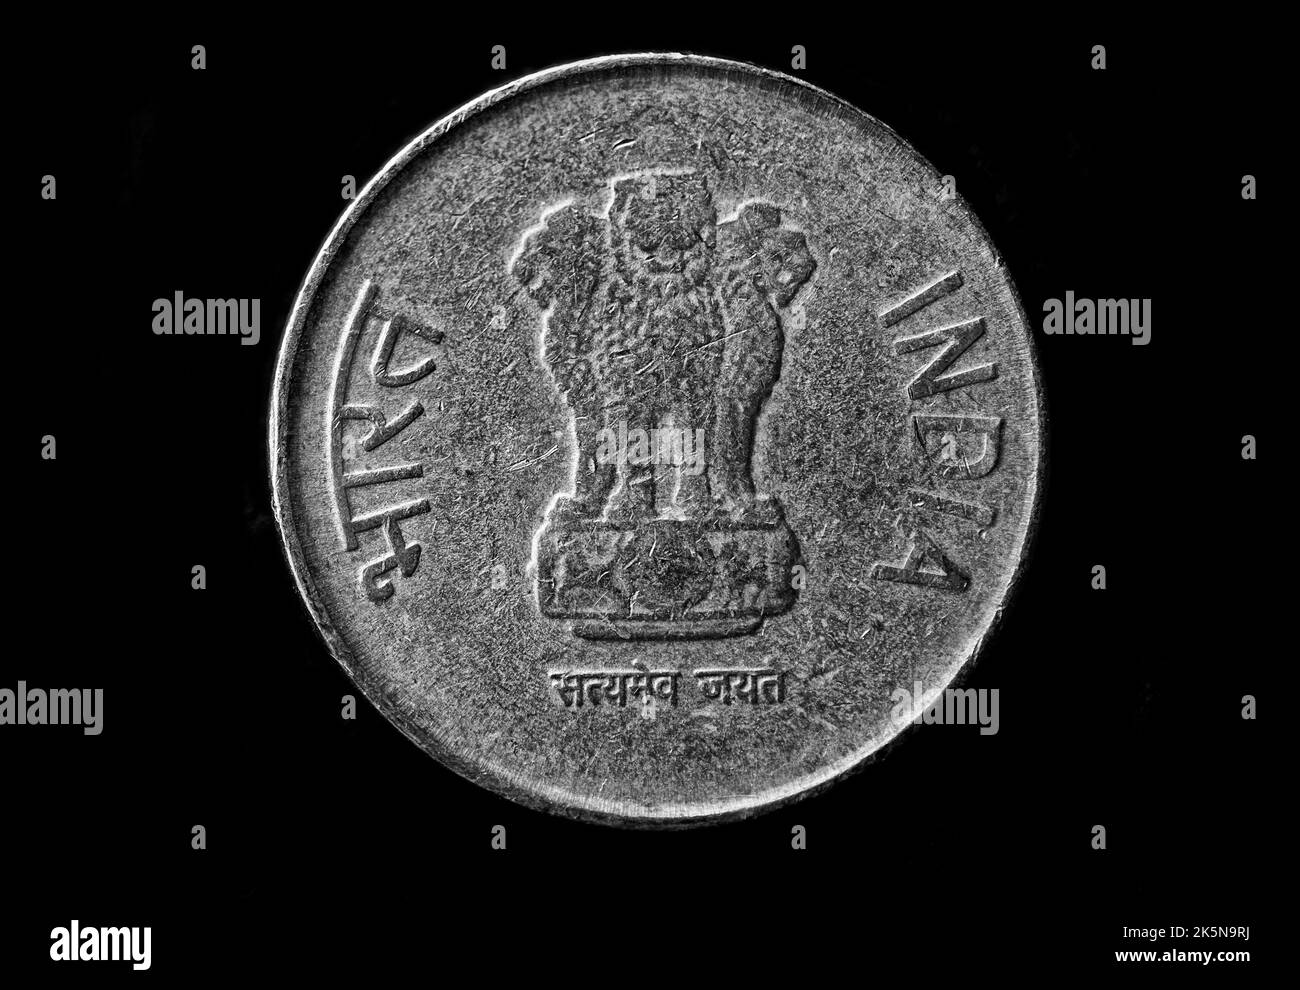 Rupees india Black and White Stock Photos & Images - Alamy